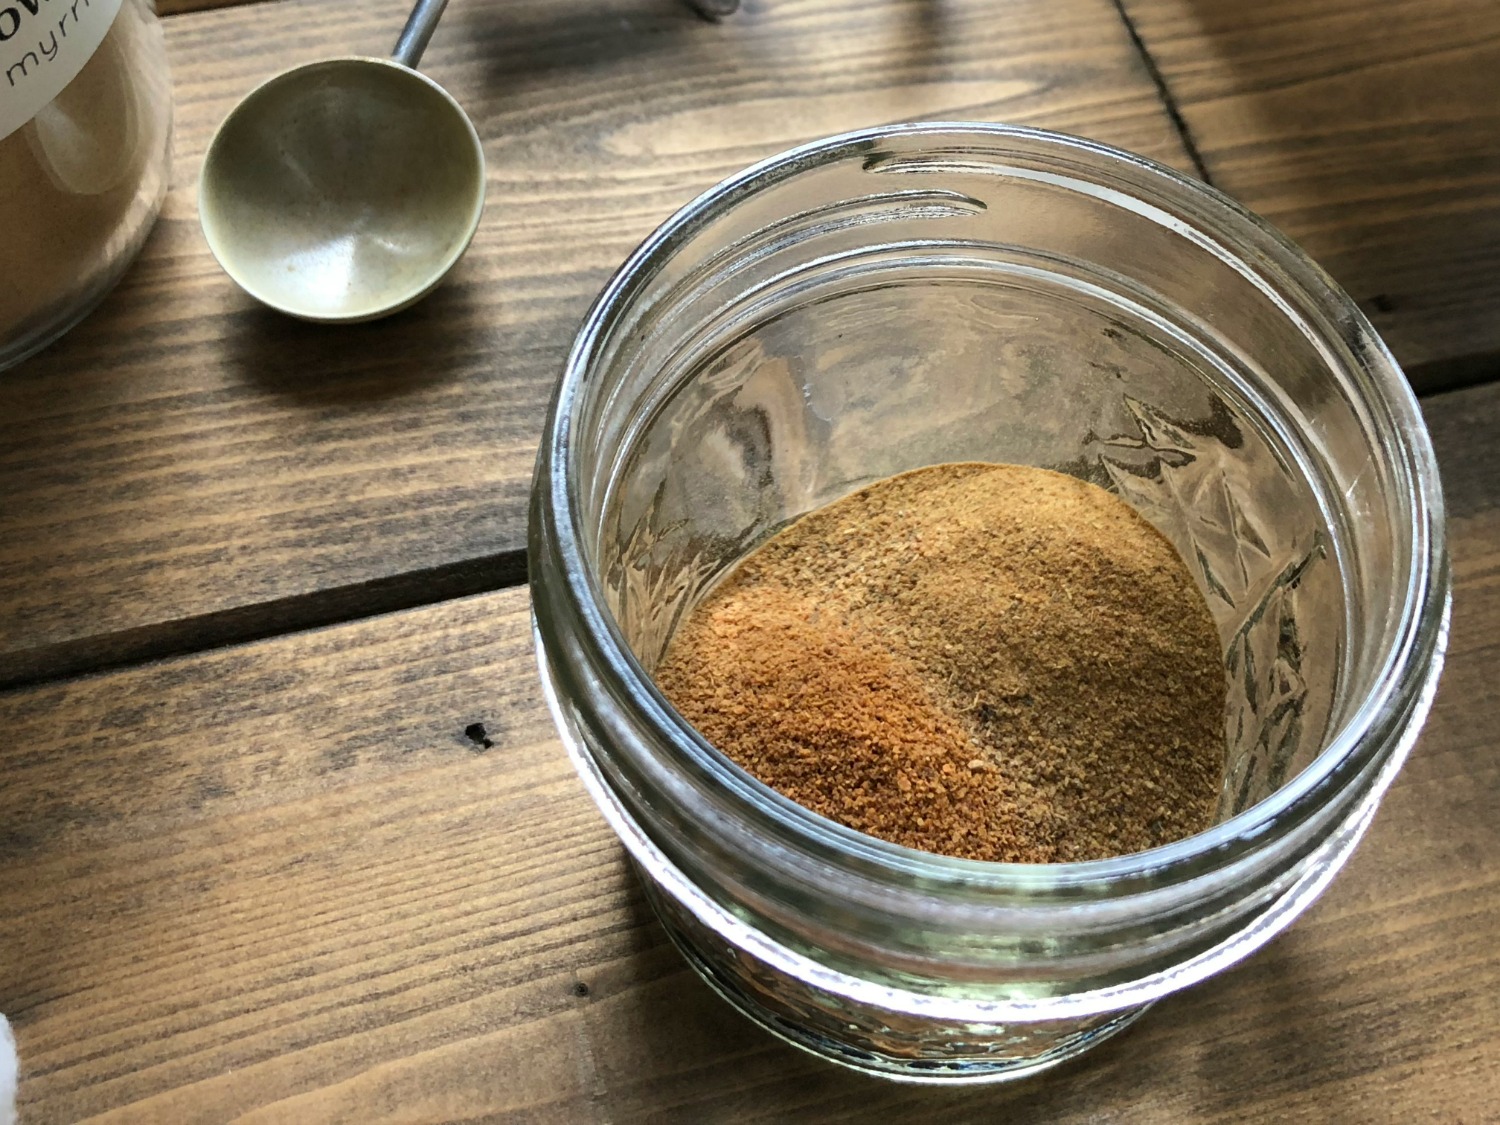 How To Make Jethro Kloss’s Herbal Liniment | Herbal Academy | Are you looking for something for pain, swelling, bruises, headaches, rheumatism, and more? Here's a great recipe for Jethro Kloss's Herbal Liniment!